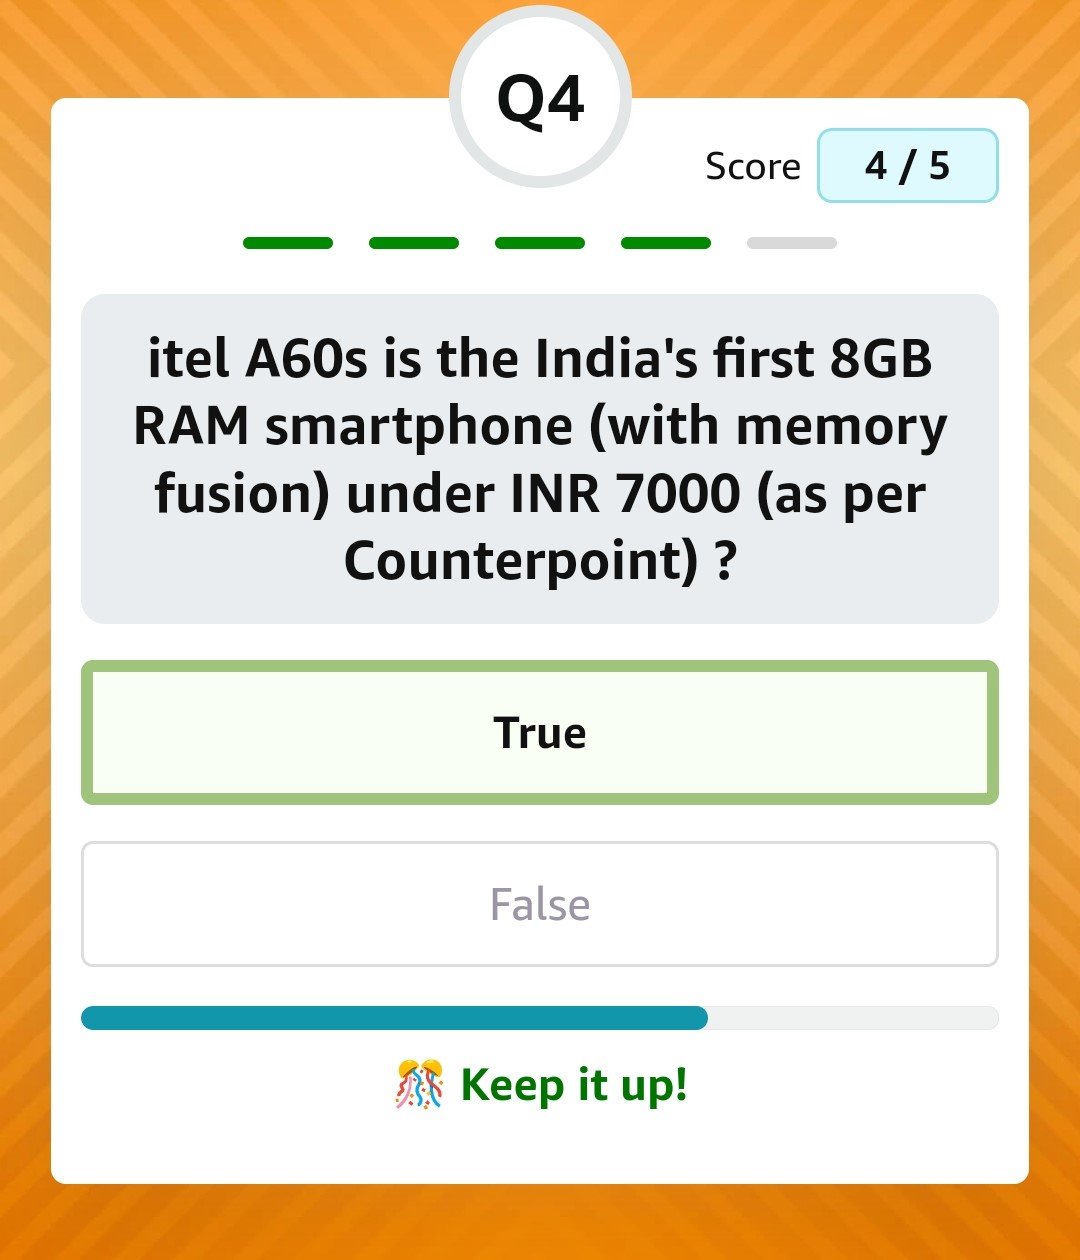 Itel A60s Is The India’s First 8GB RAM Smartphone (With Memory Fusion) Under INR 7000 (As Per Counterpoint)